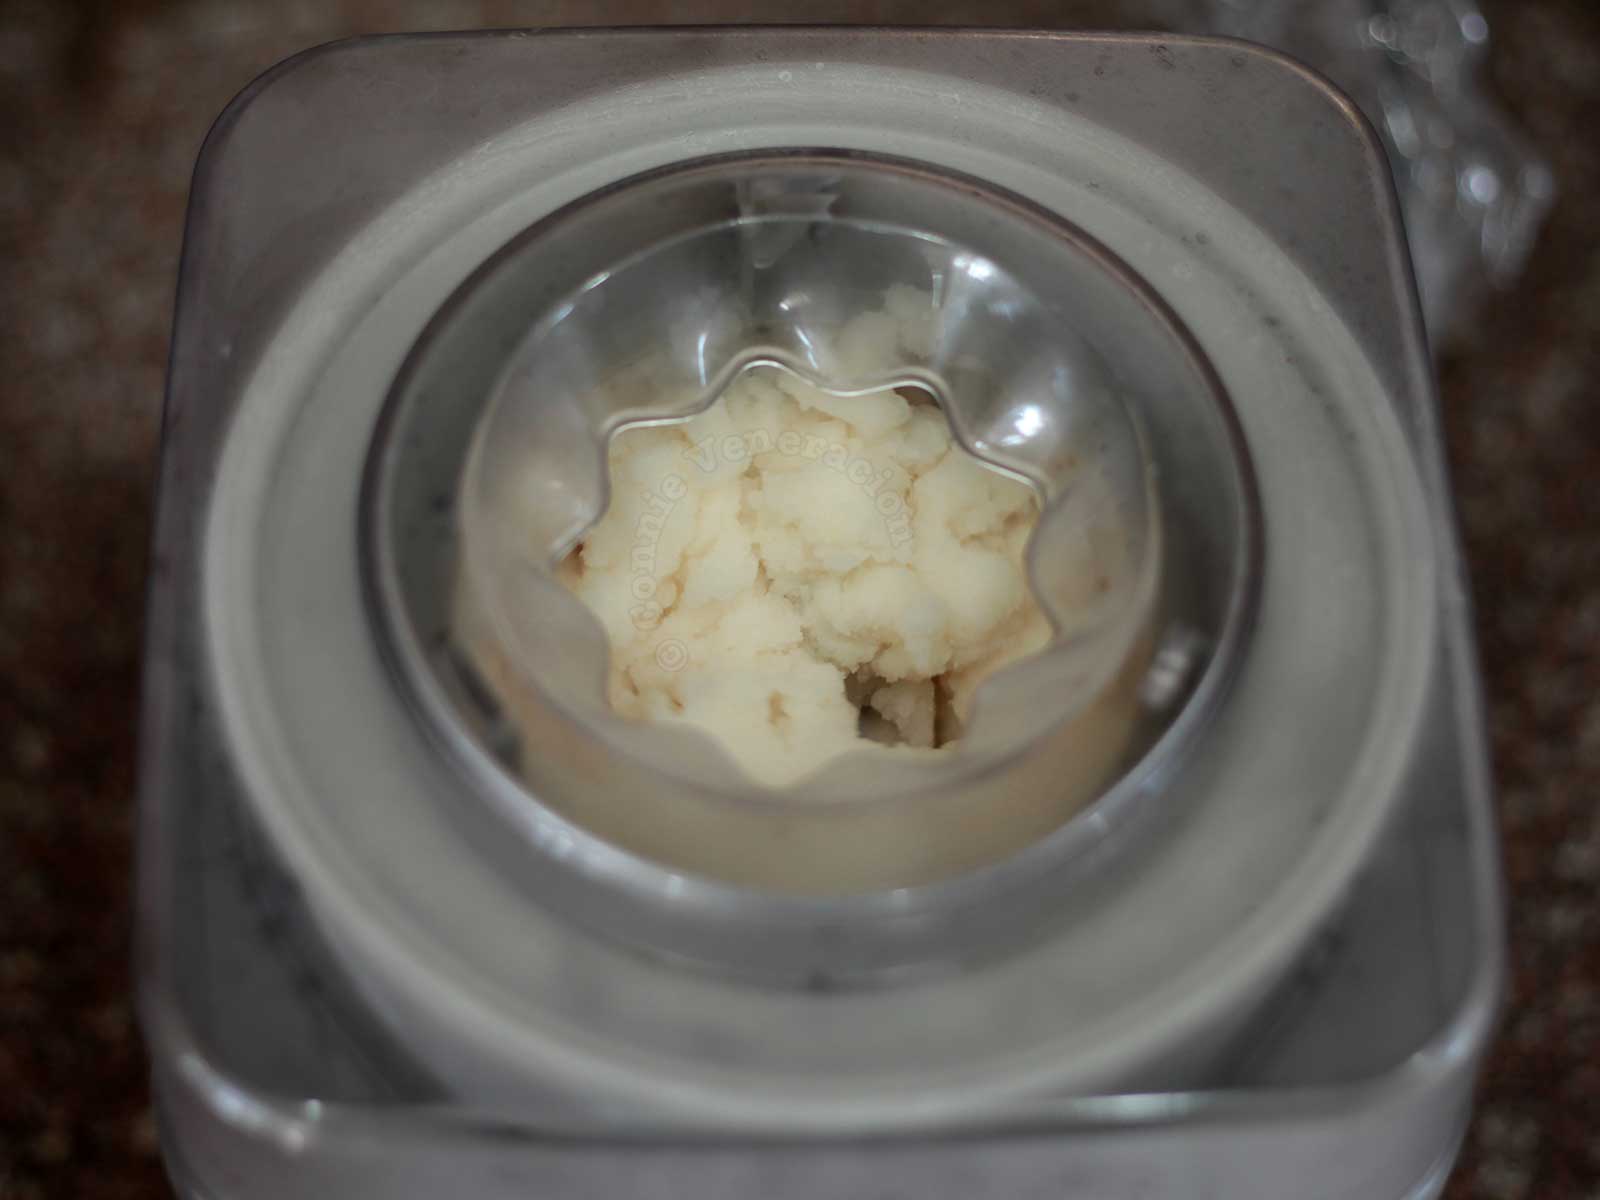 Making sorbet with a Cuisinart ice cream maker